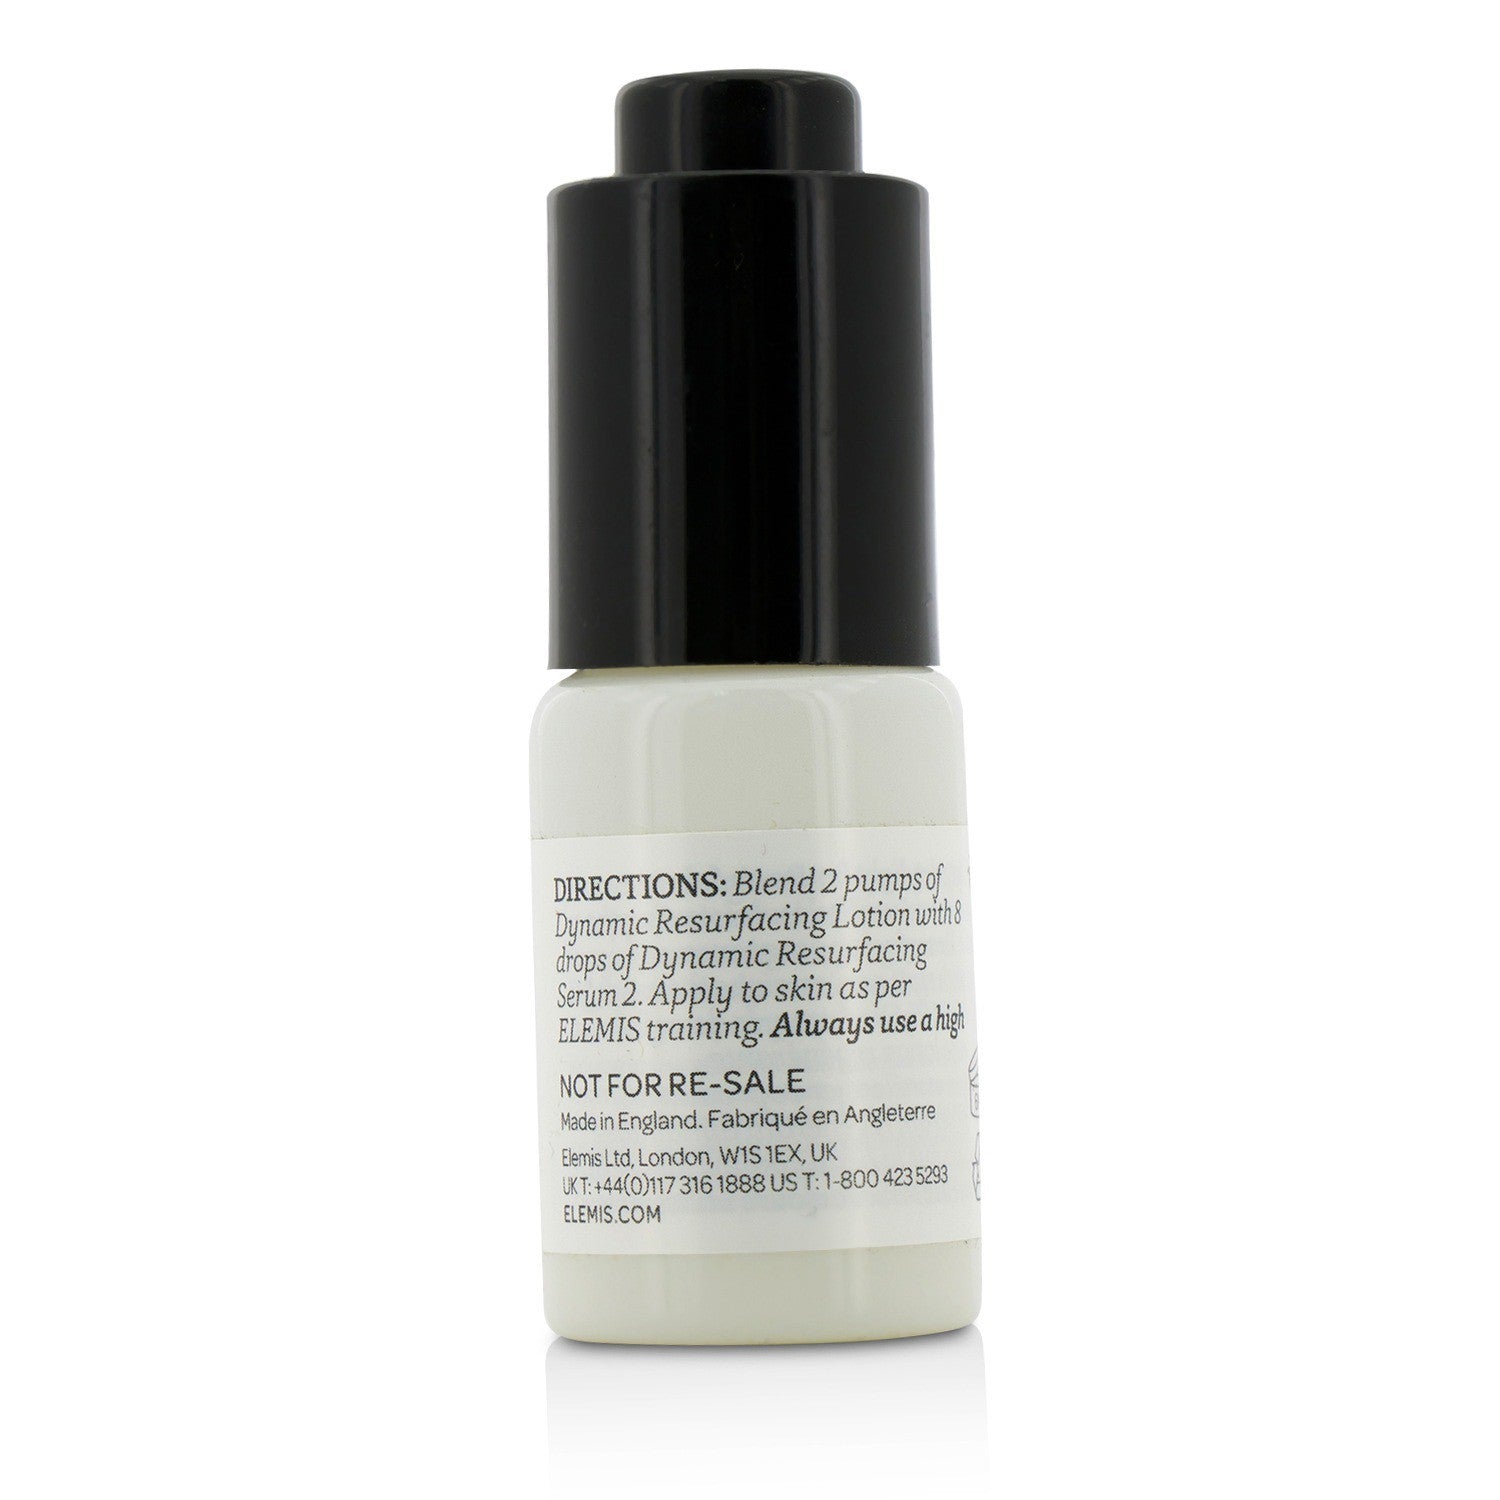 A bottle of Dynamic Resurfacing Serum 2 - Salon Product, labeled for professional use, 15 ml size, isolated on a white background.